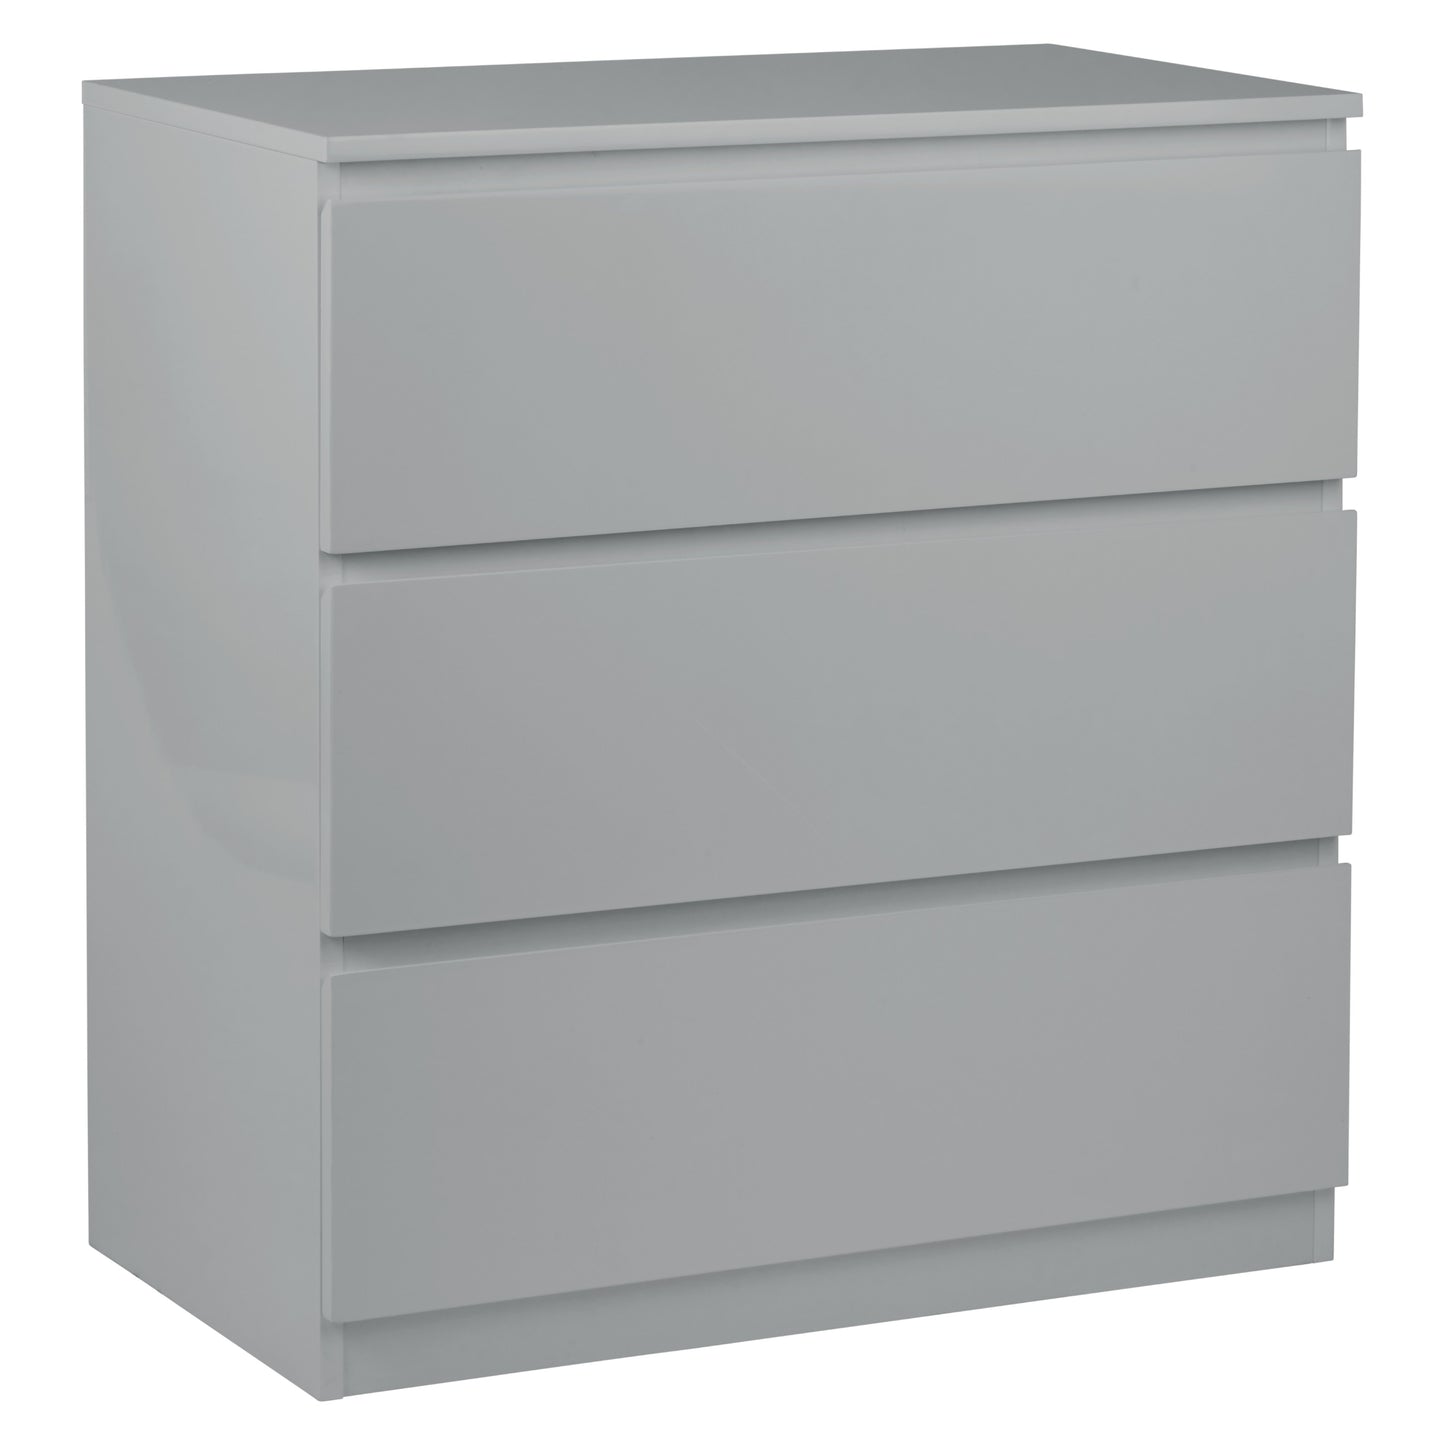 Clemmie high gloss chest of drawers - grey - Laura James